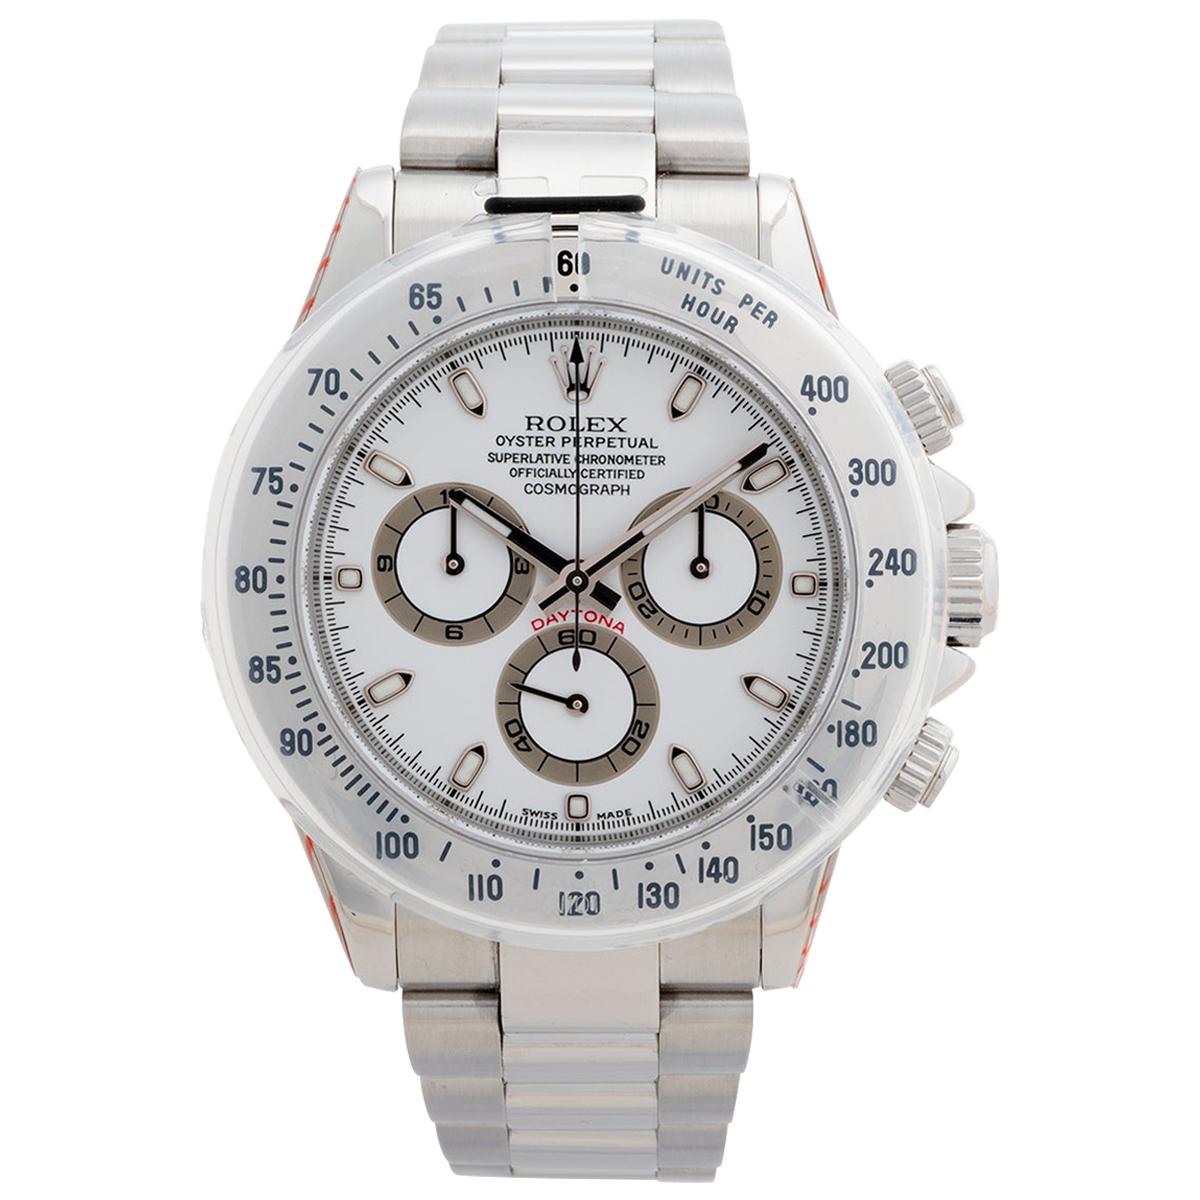 Rolex Daytona Ref 116520, White Dial, Stainless Steel, with Box and Papers